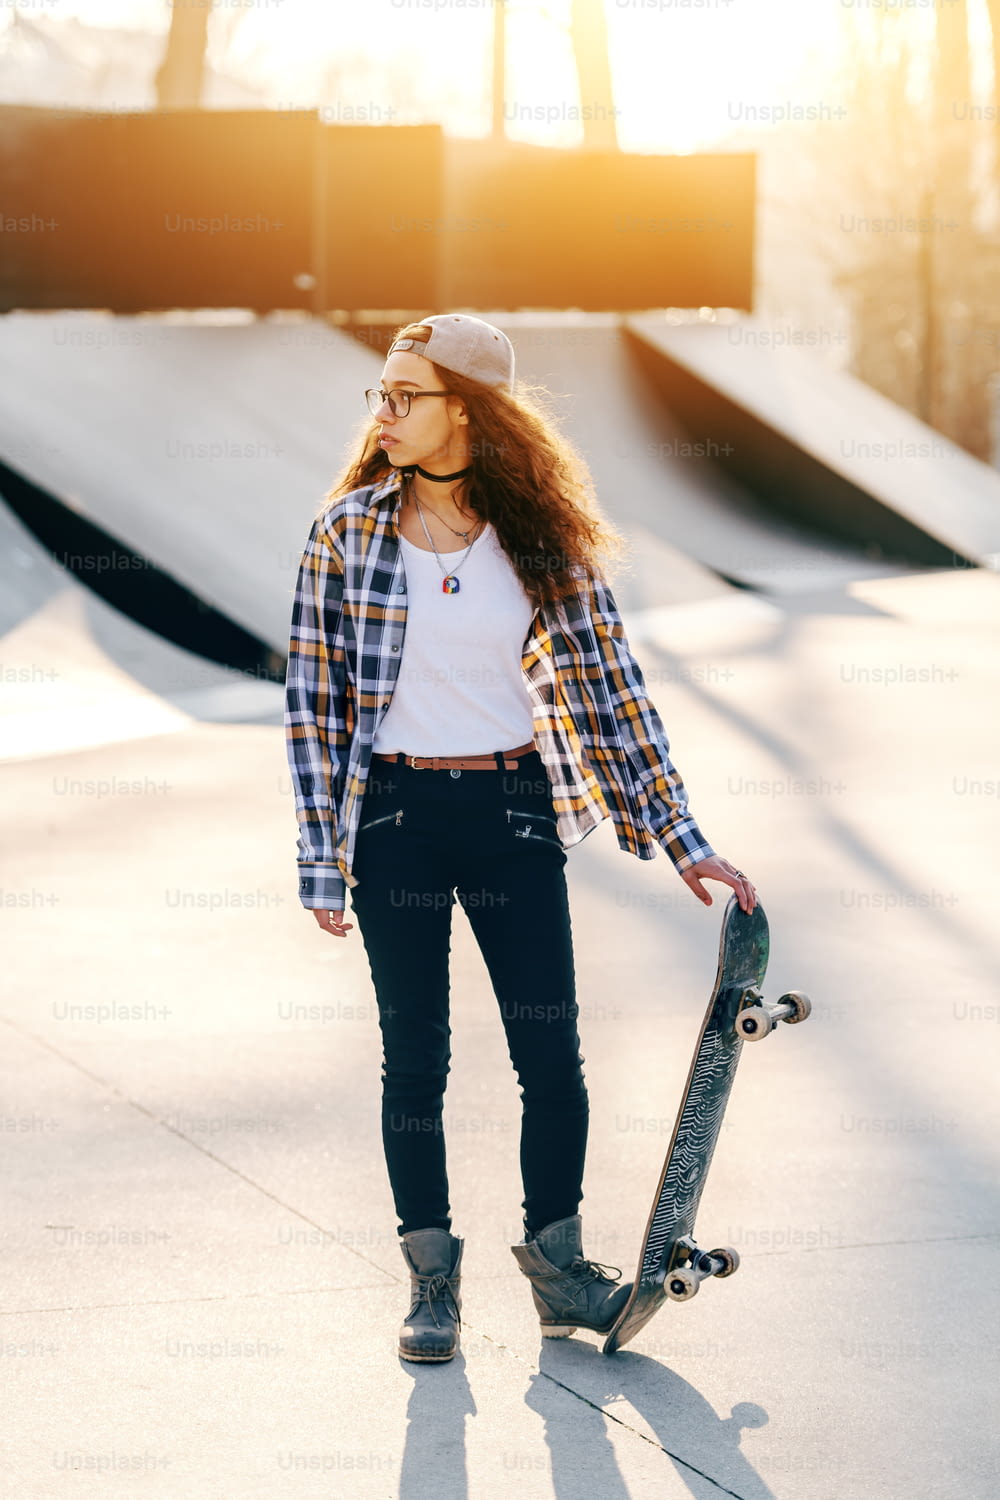 Beautiful mixed race teenage urban girl with curly hair posing with skateboard at skate park.